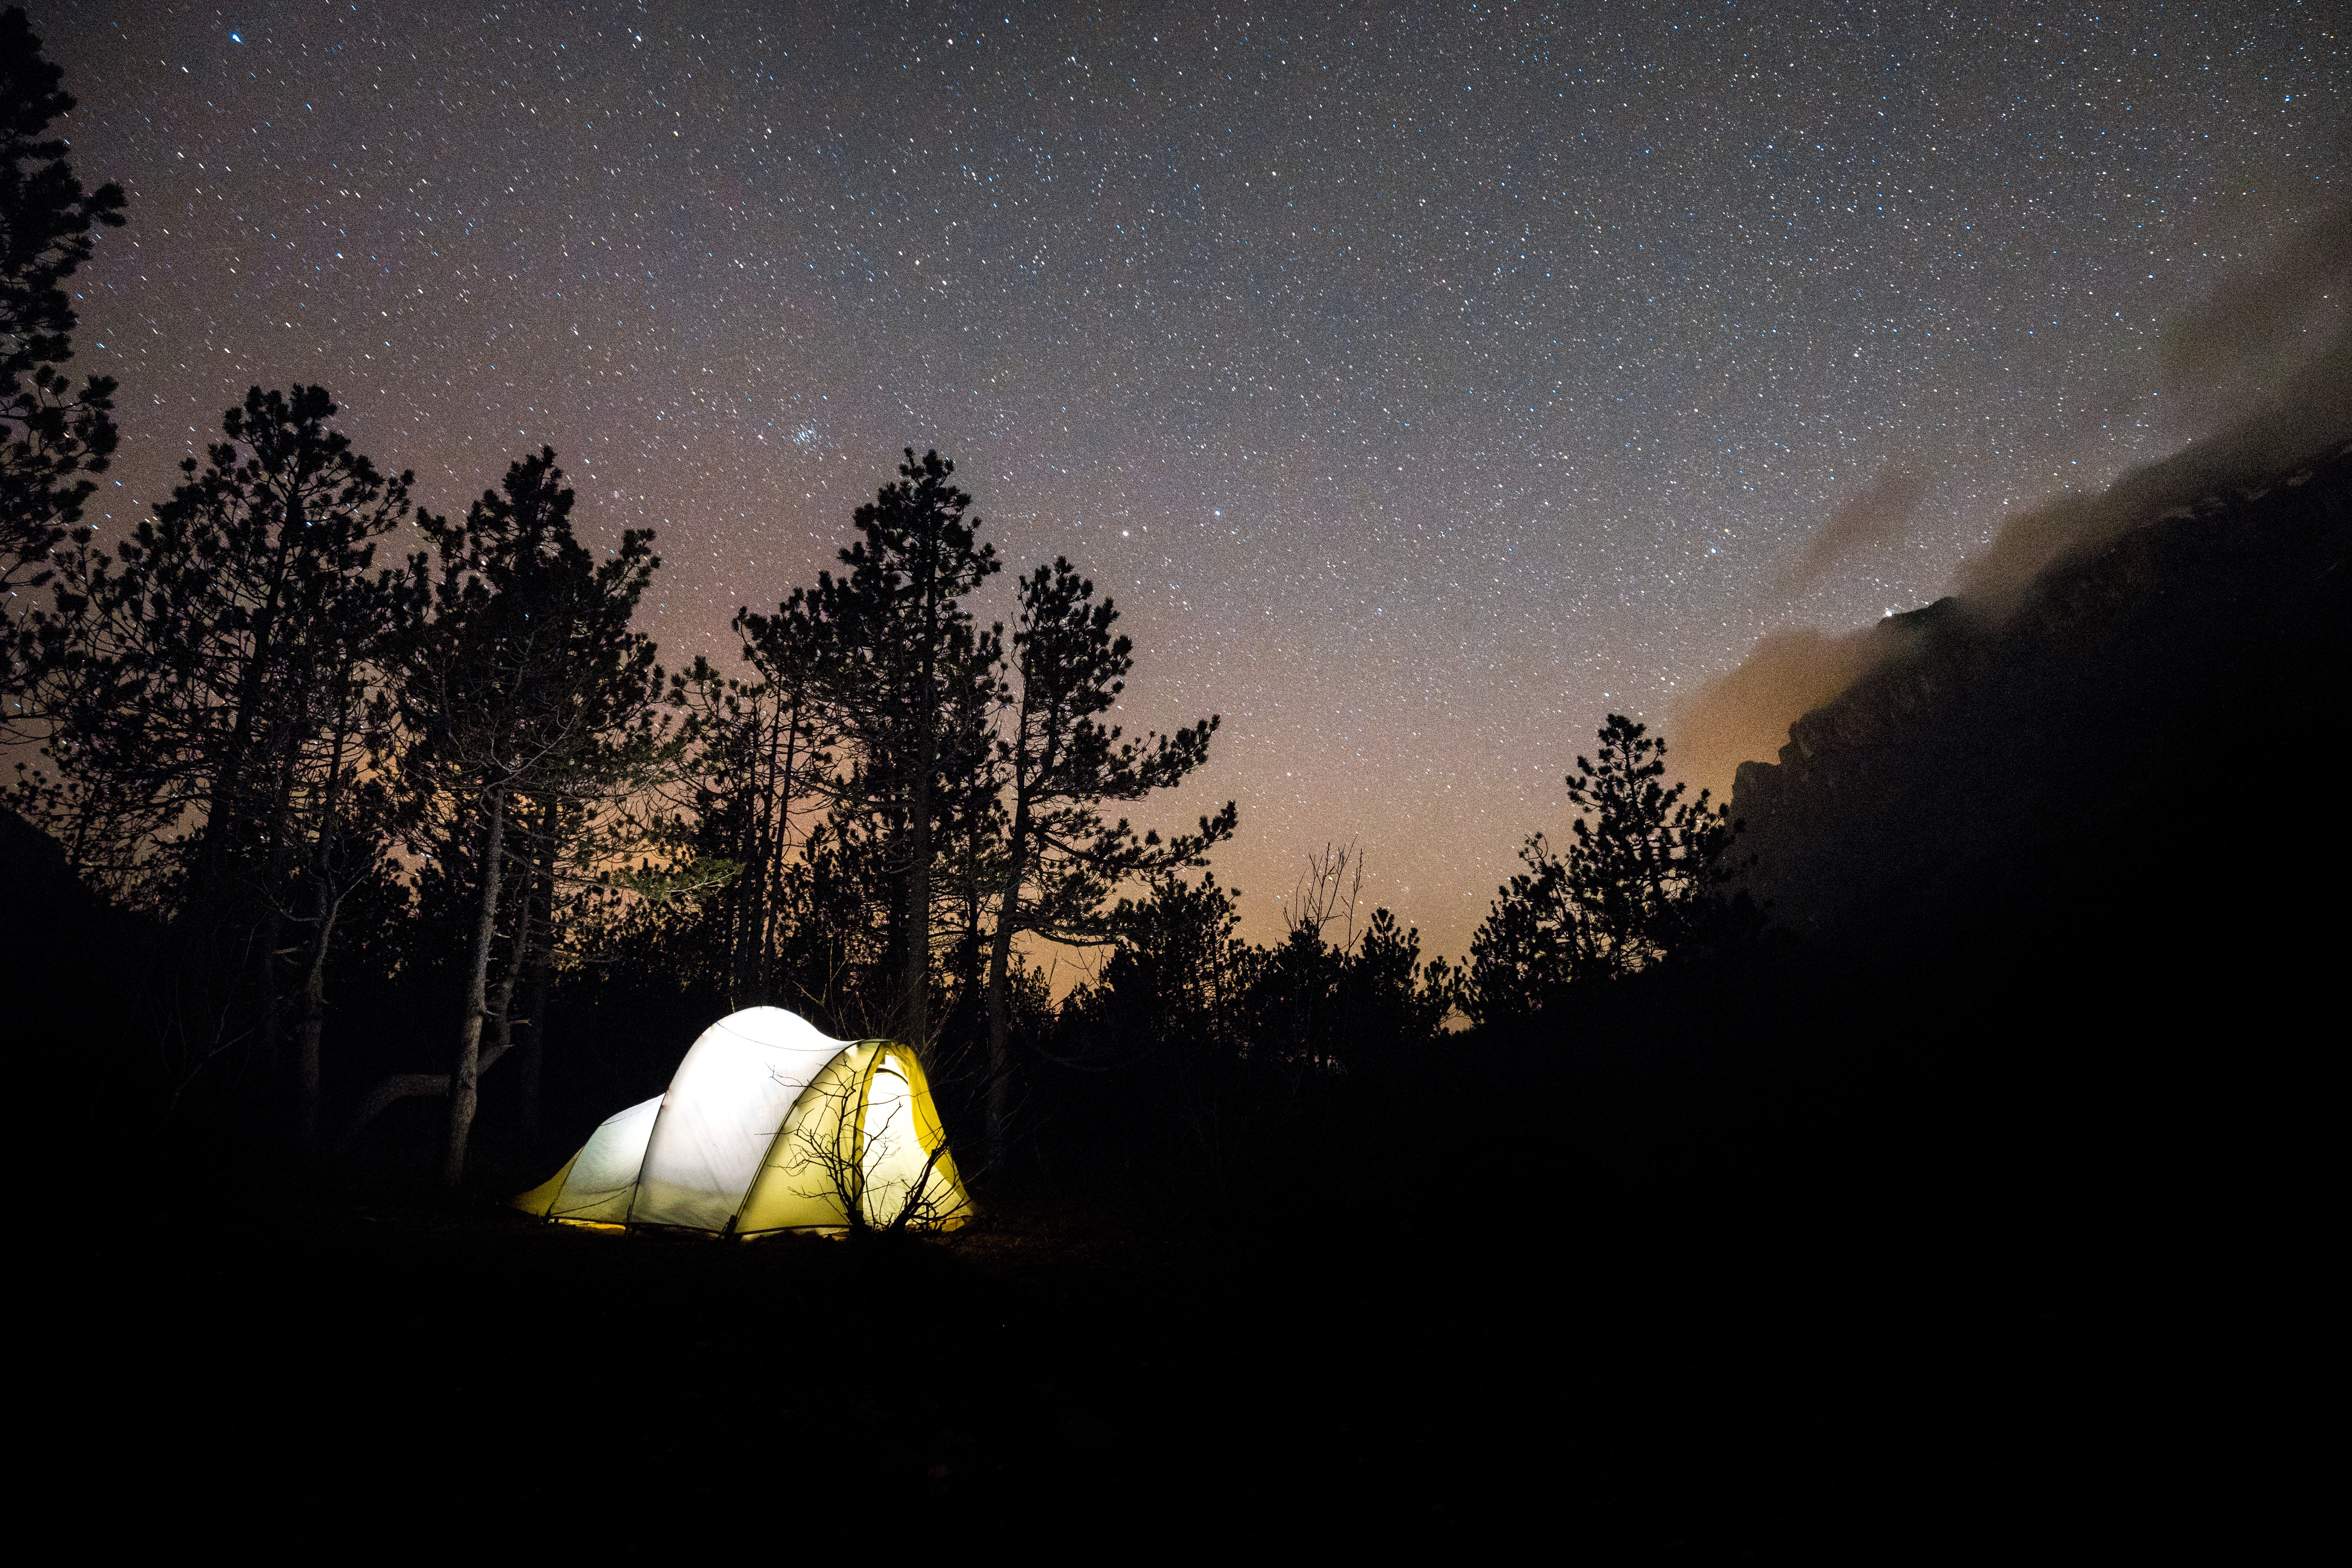 journey, nature, night, starry sky, tent, camping, campsite